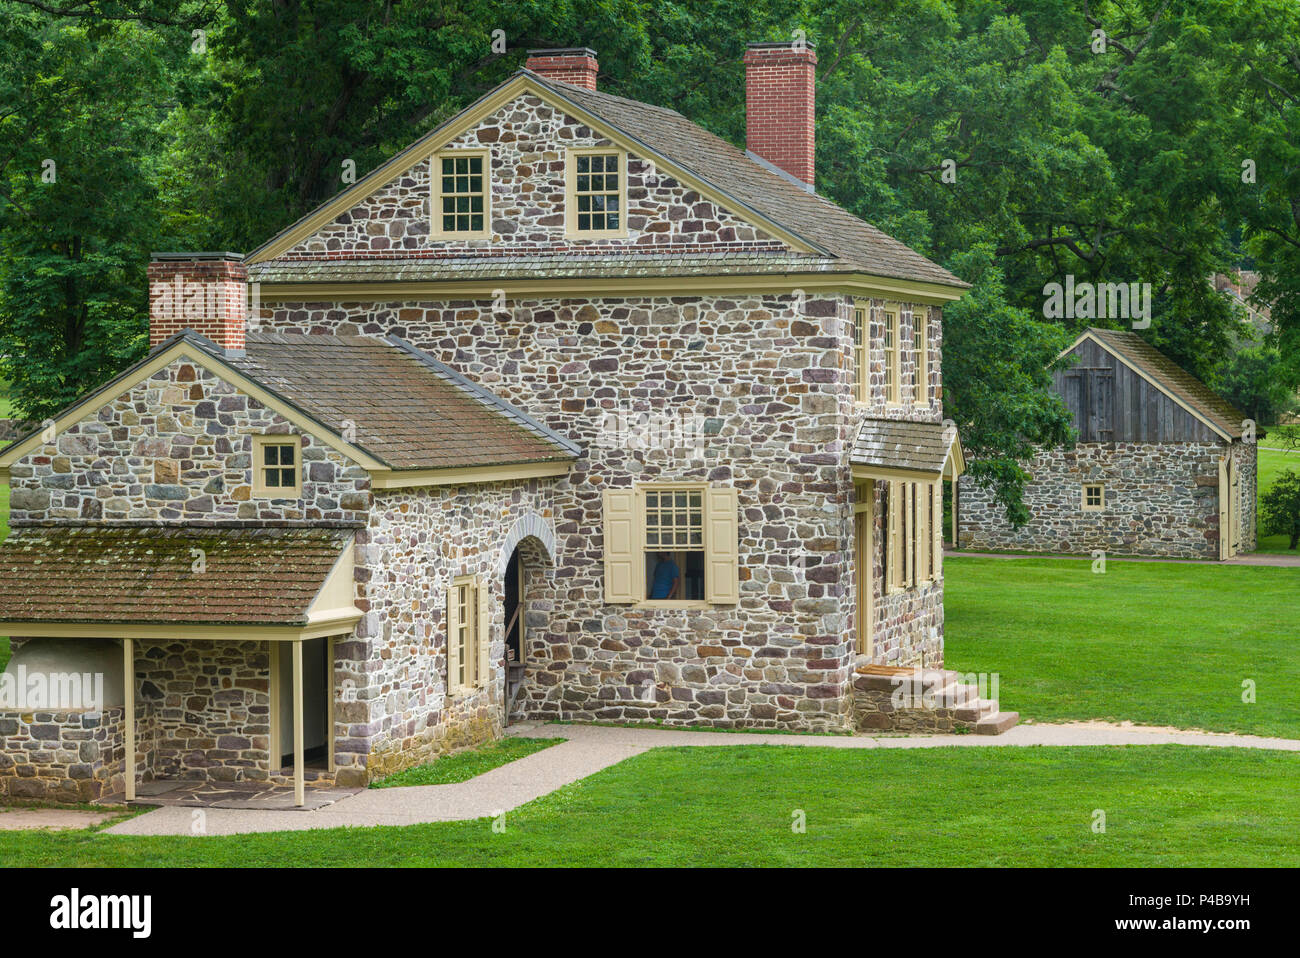 USA, Pennsylvania, King of Prussia, Valley Forge National Historical Park, Battlefield of the American Revolutionary War, General George Washington's Headquarters Stock Photo